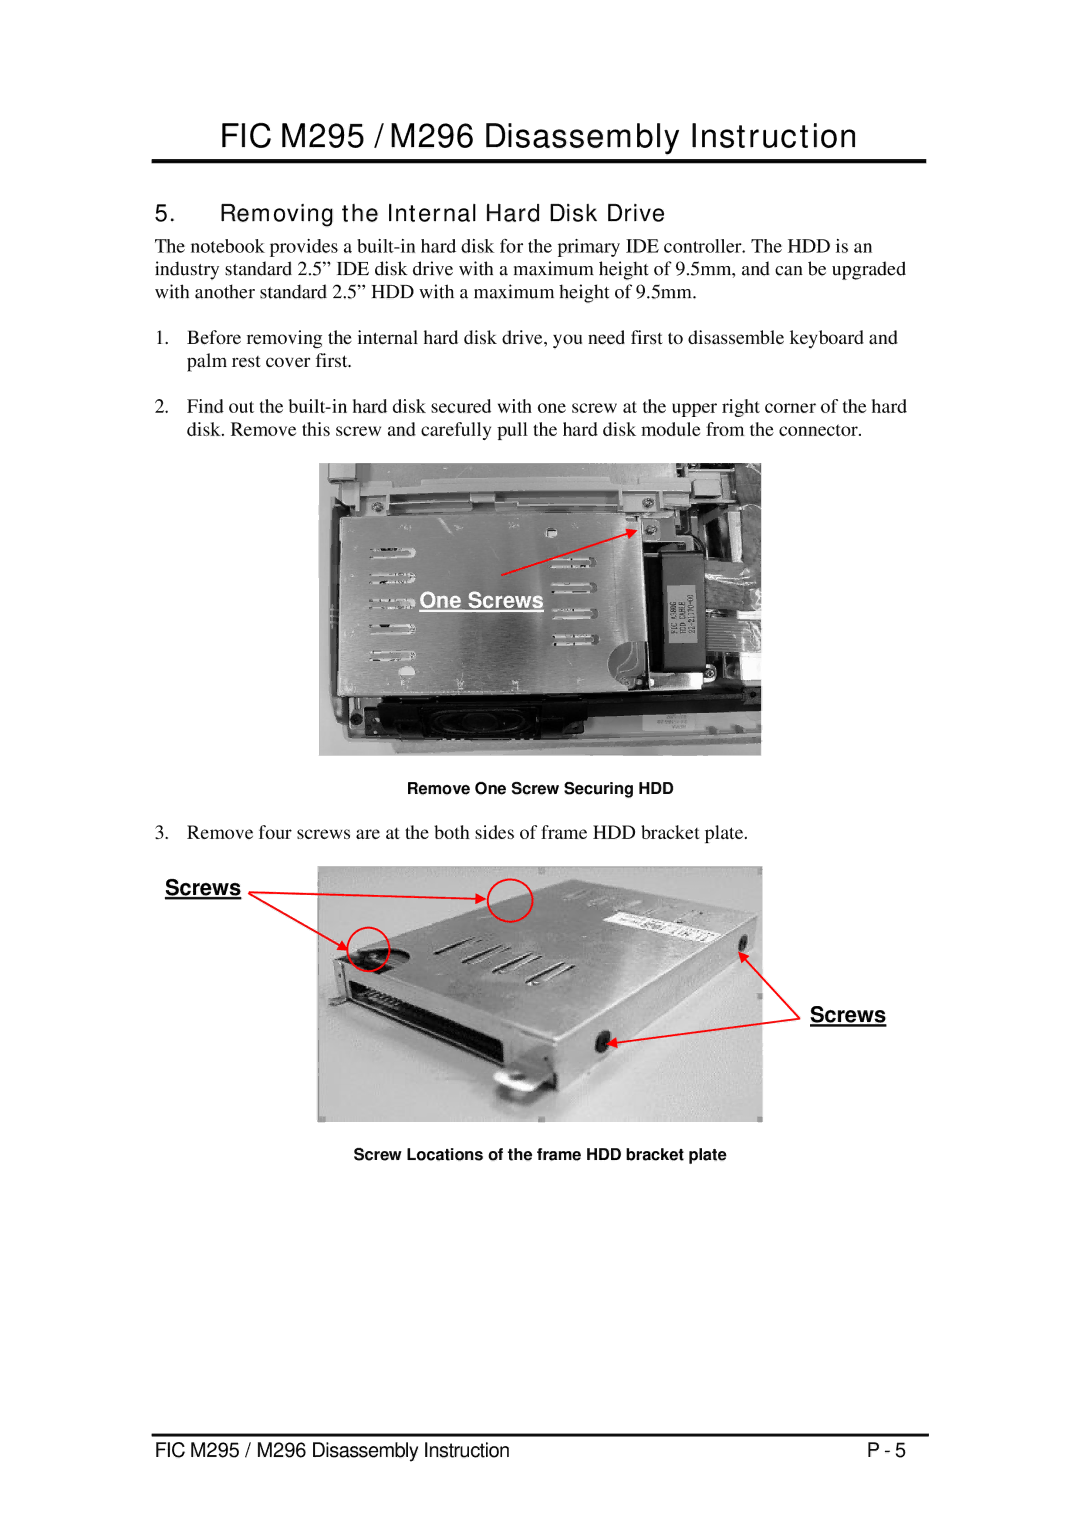 FIC M296, M295 service manual Remove One Screw Securing HDD, Screw Locations of the frame HDD bracket plate 